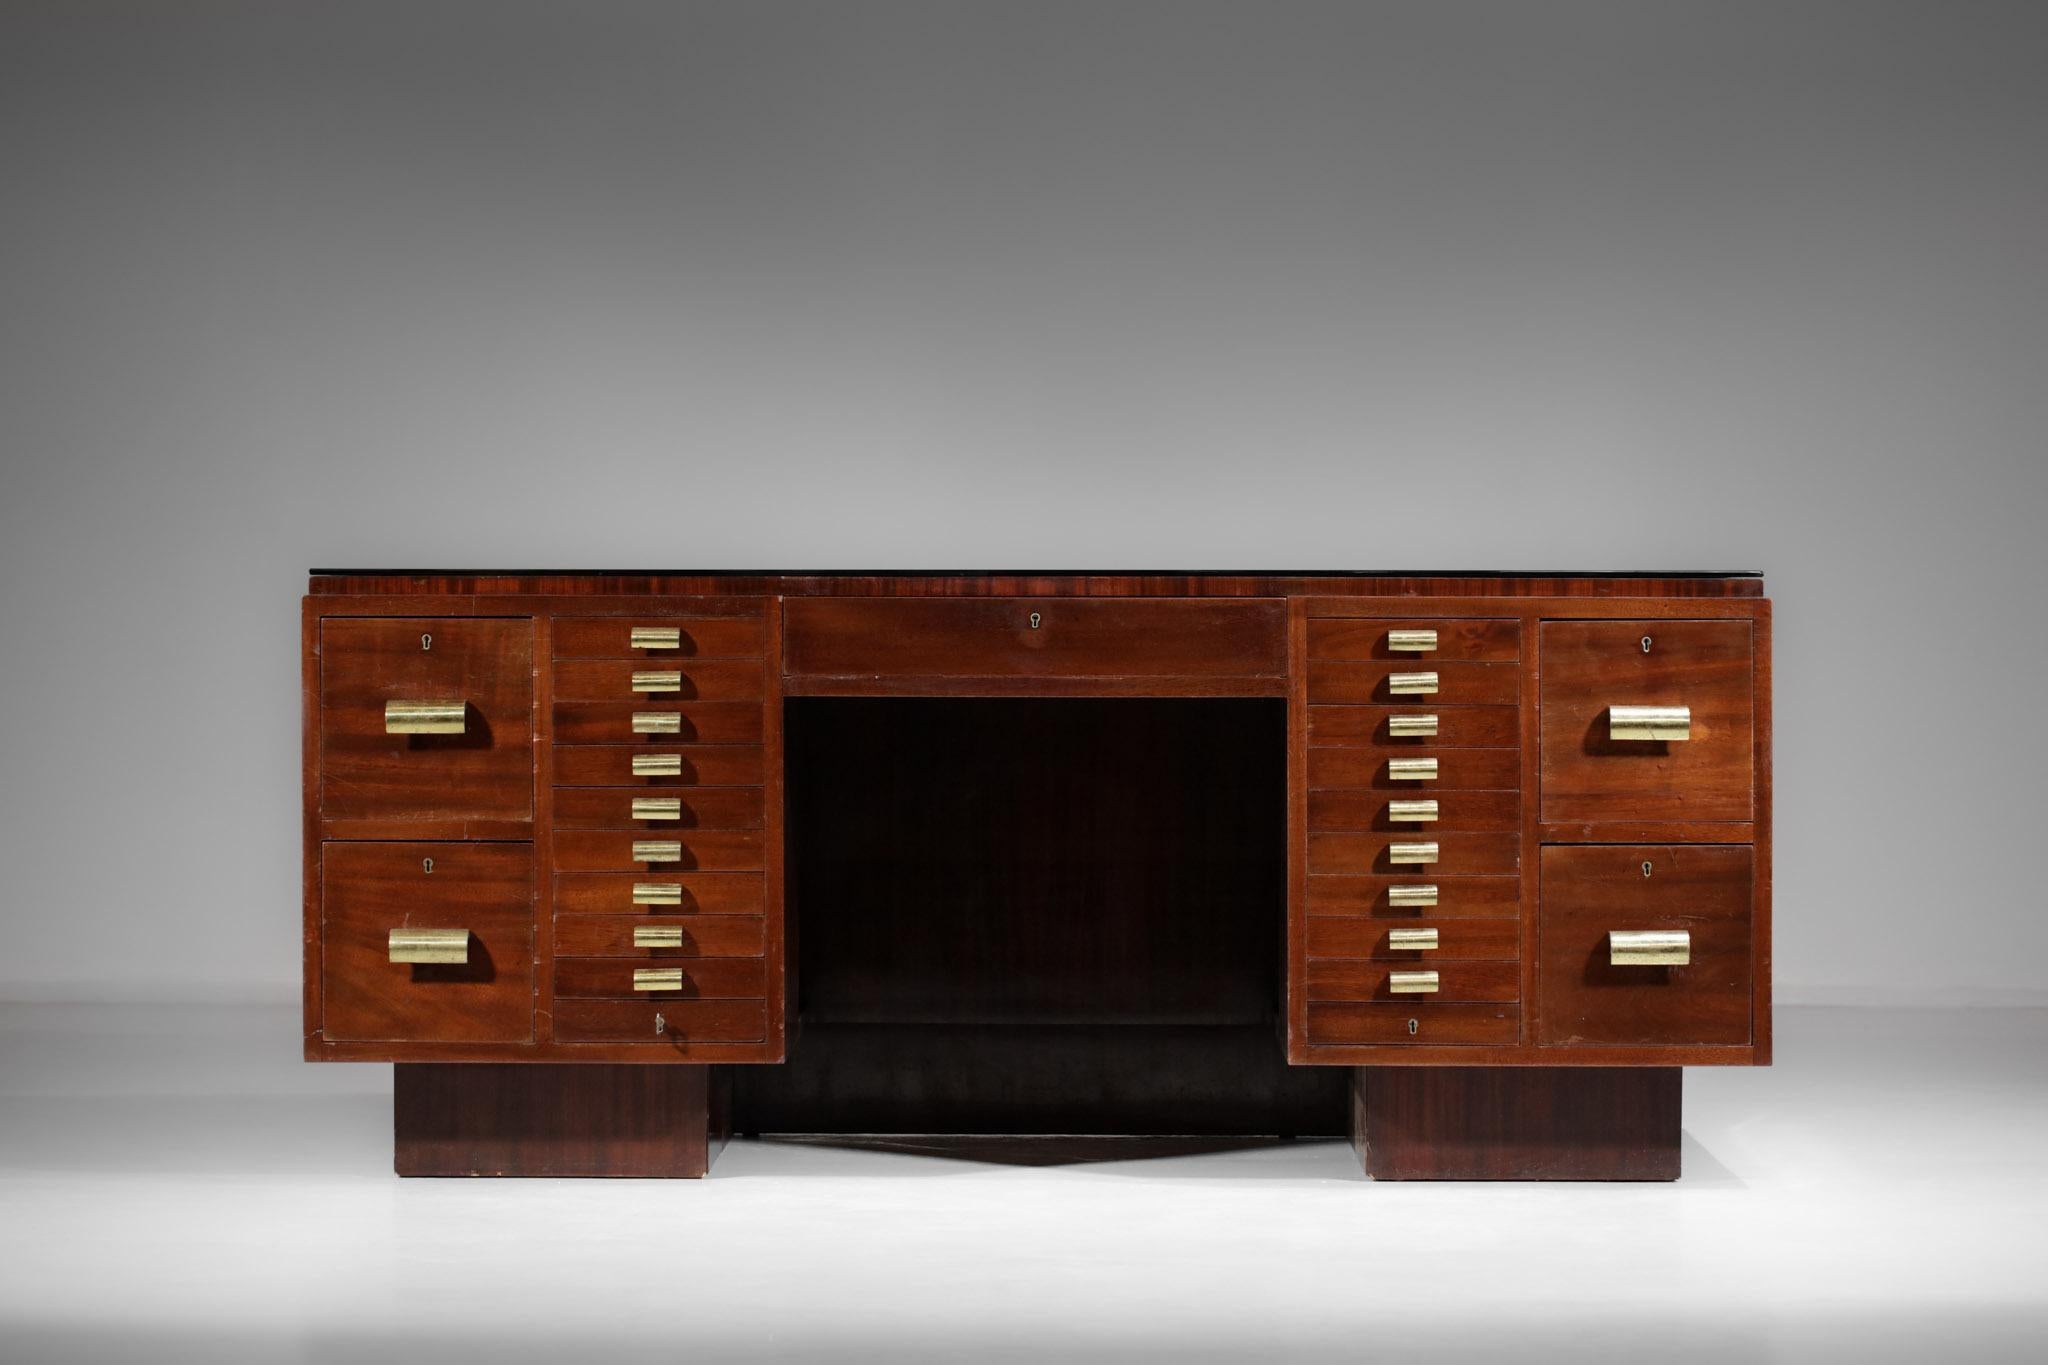 Imposing 1940's French Modernist Desk in Mahogany in Style of Dupré Lafon, E498 For Sale 10